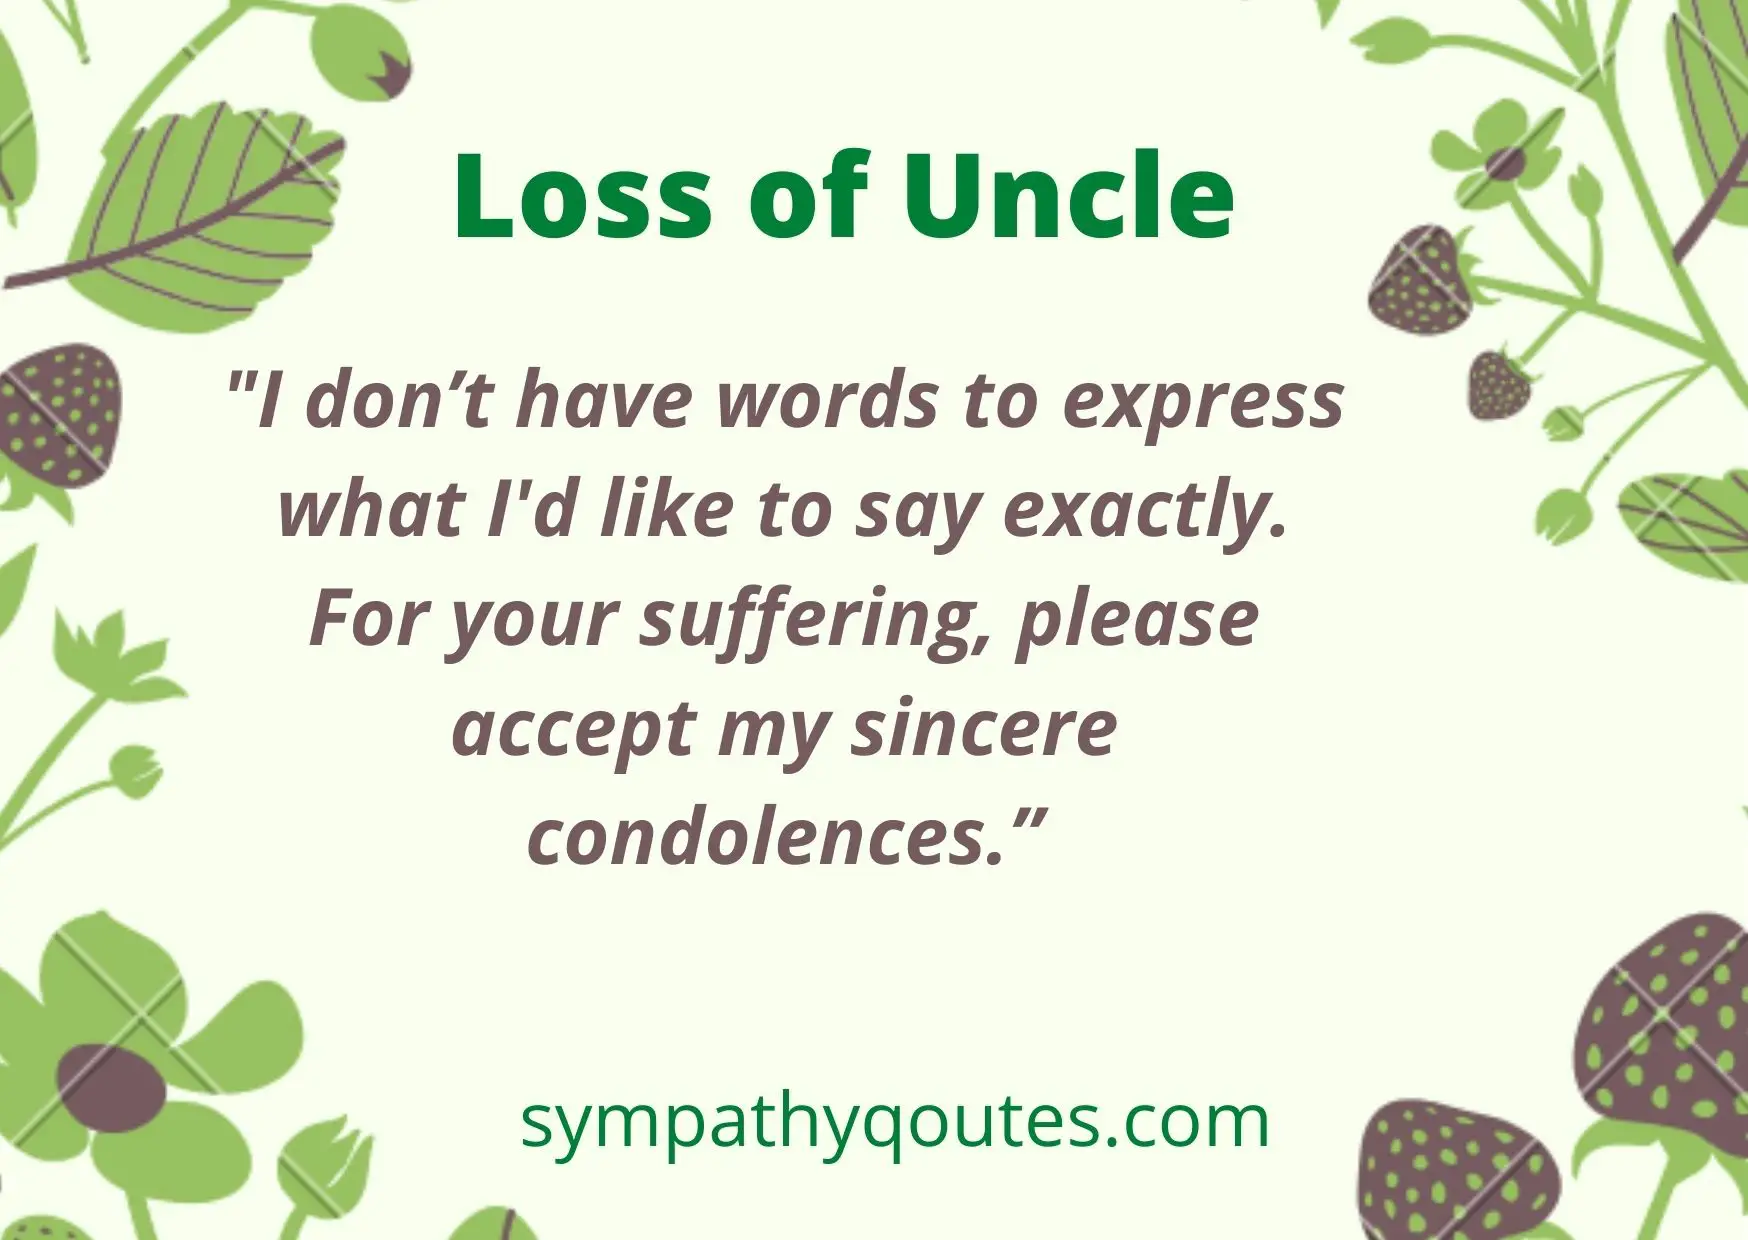 Sympathy Messages for Loss of Uncle